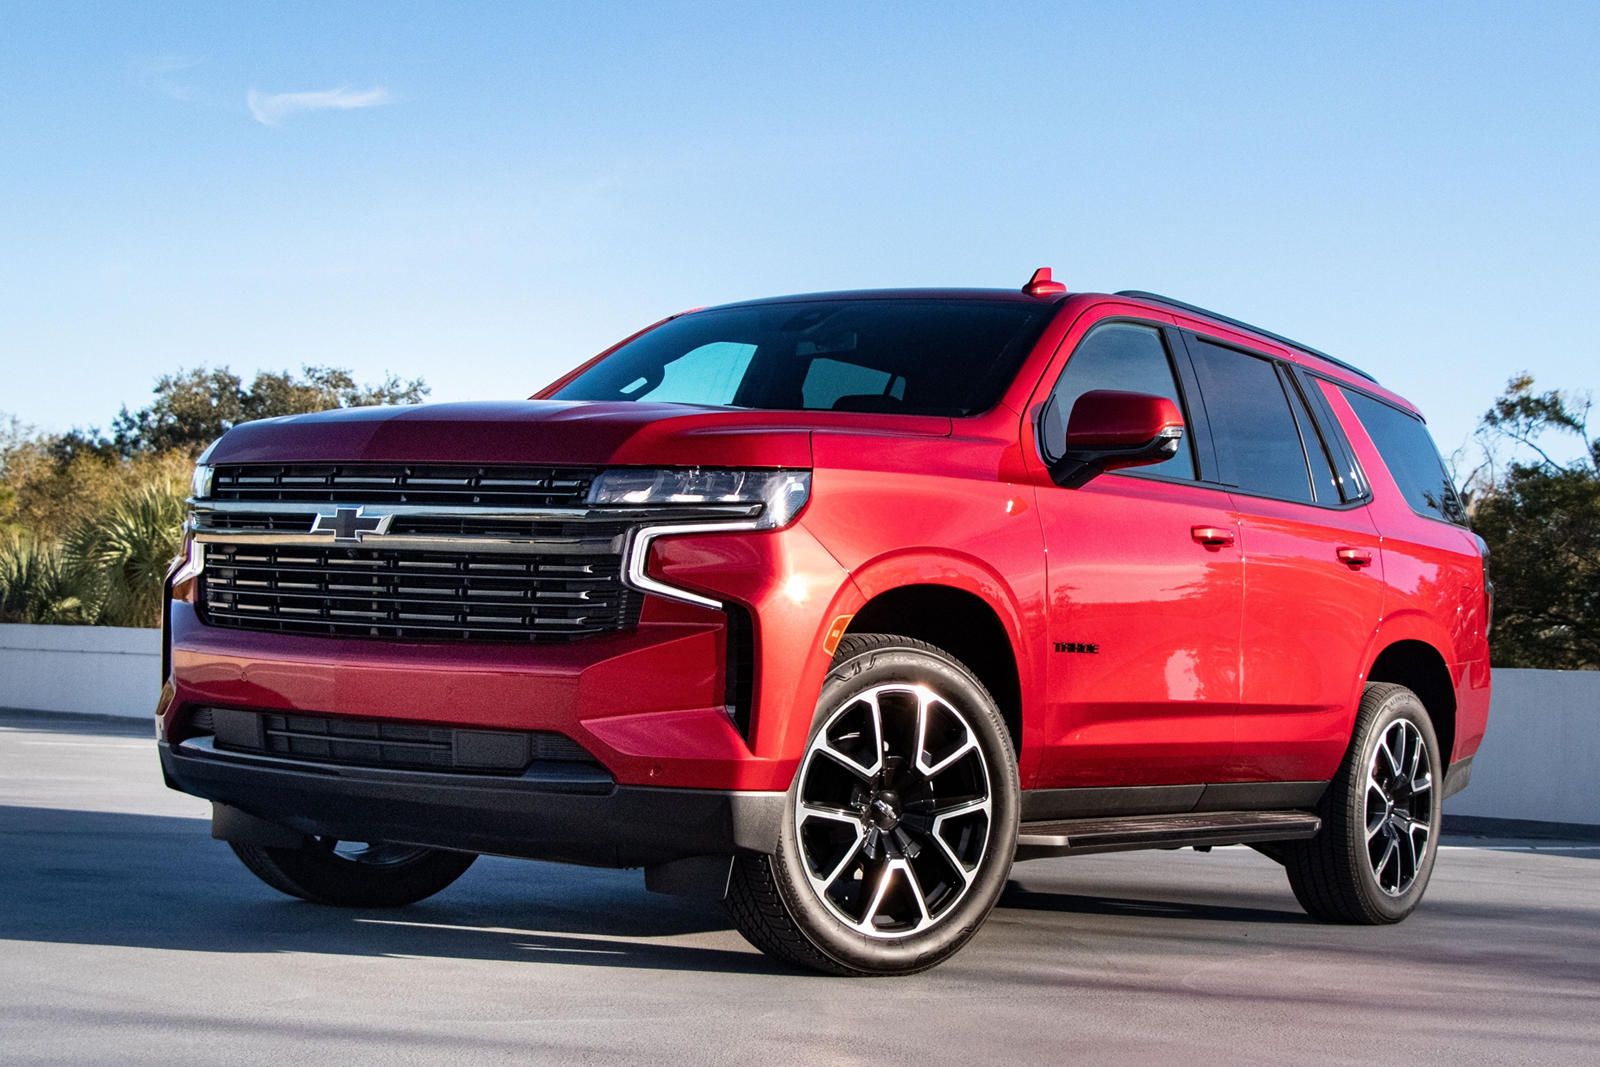 old_Chevrolet_Tahoe_2021_SUV_60d2f2373d981-1